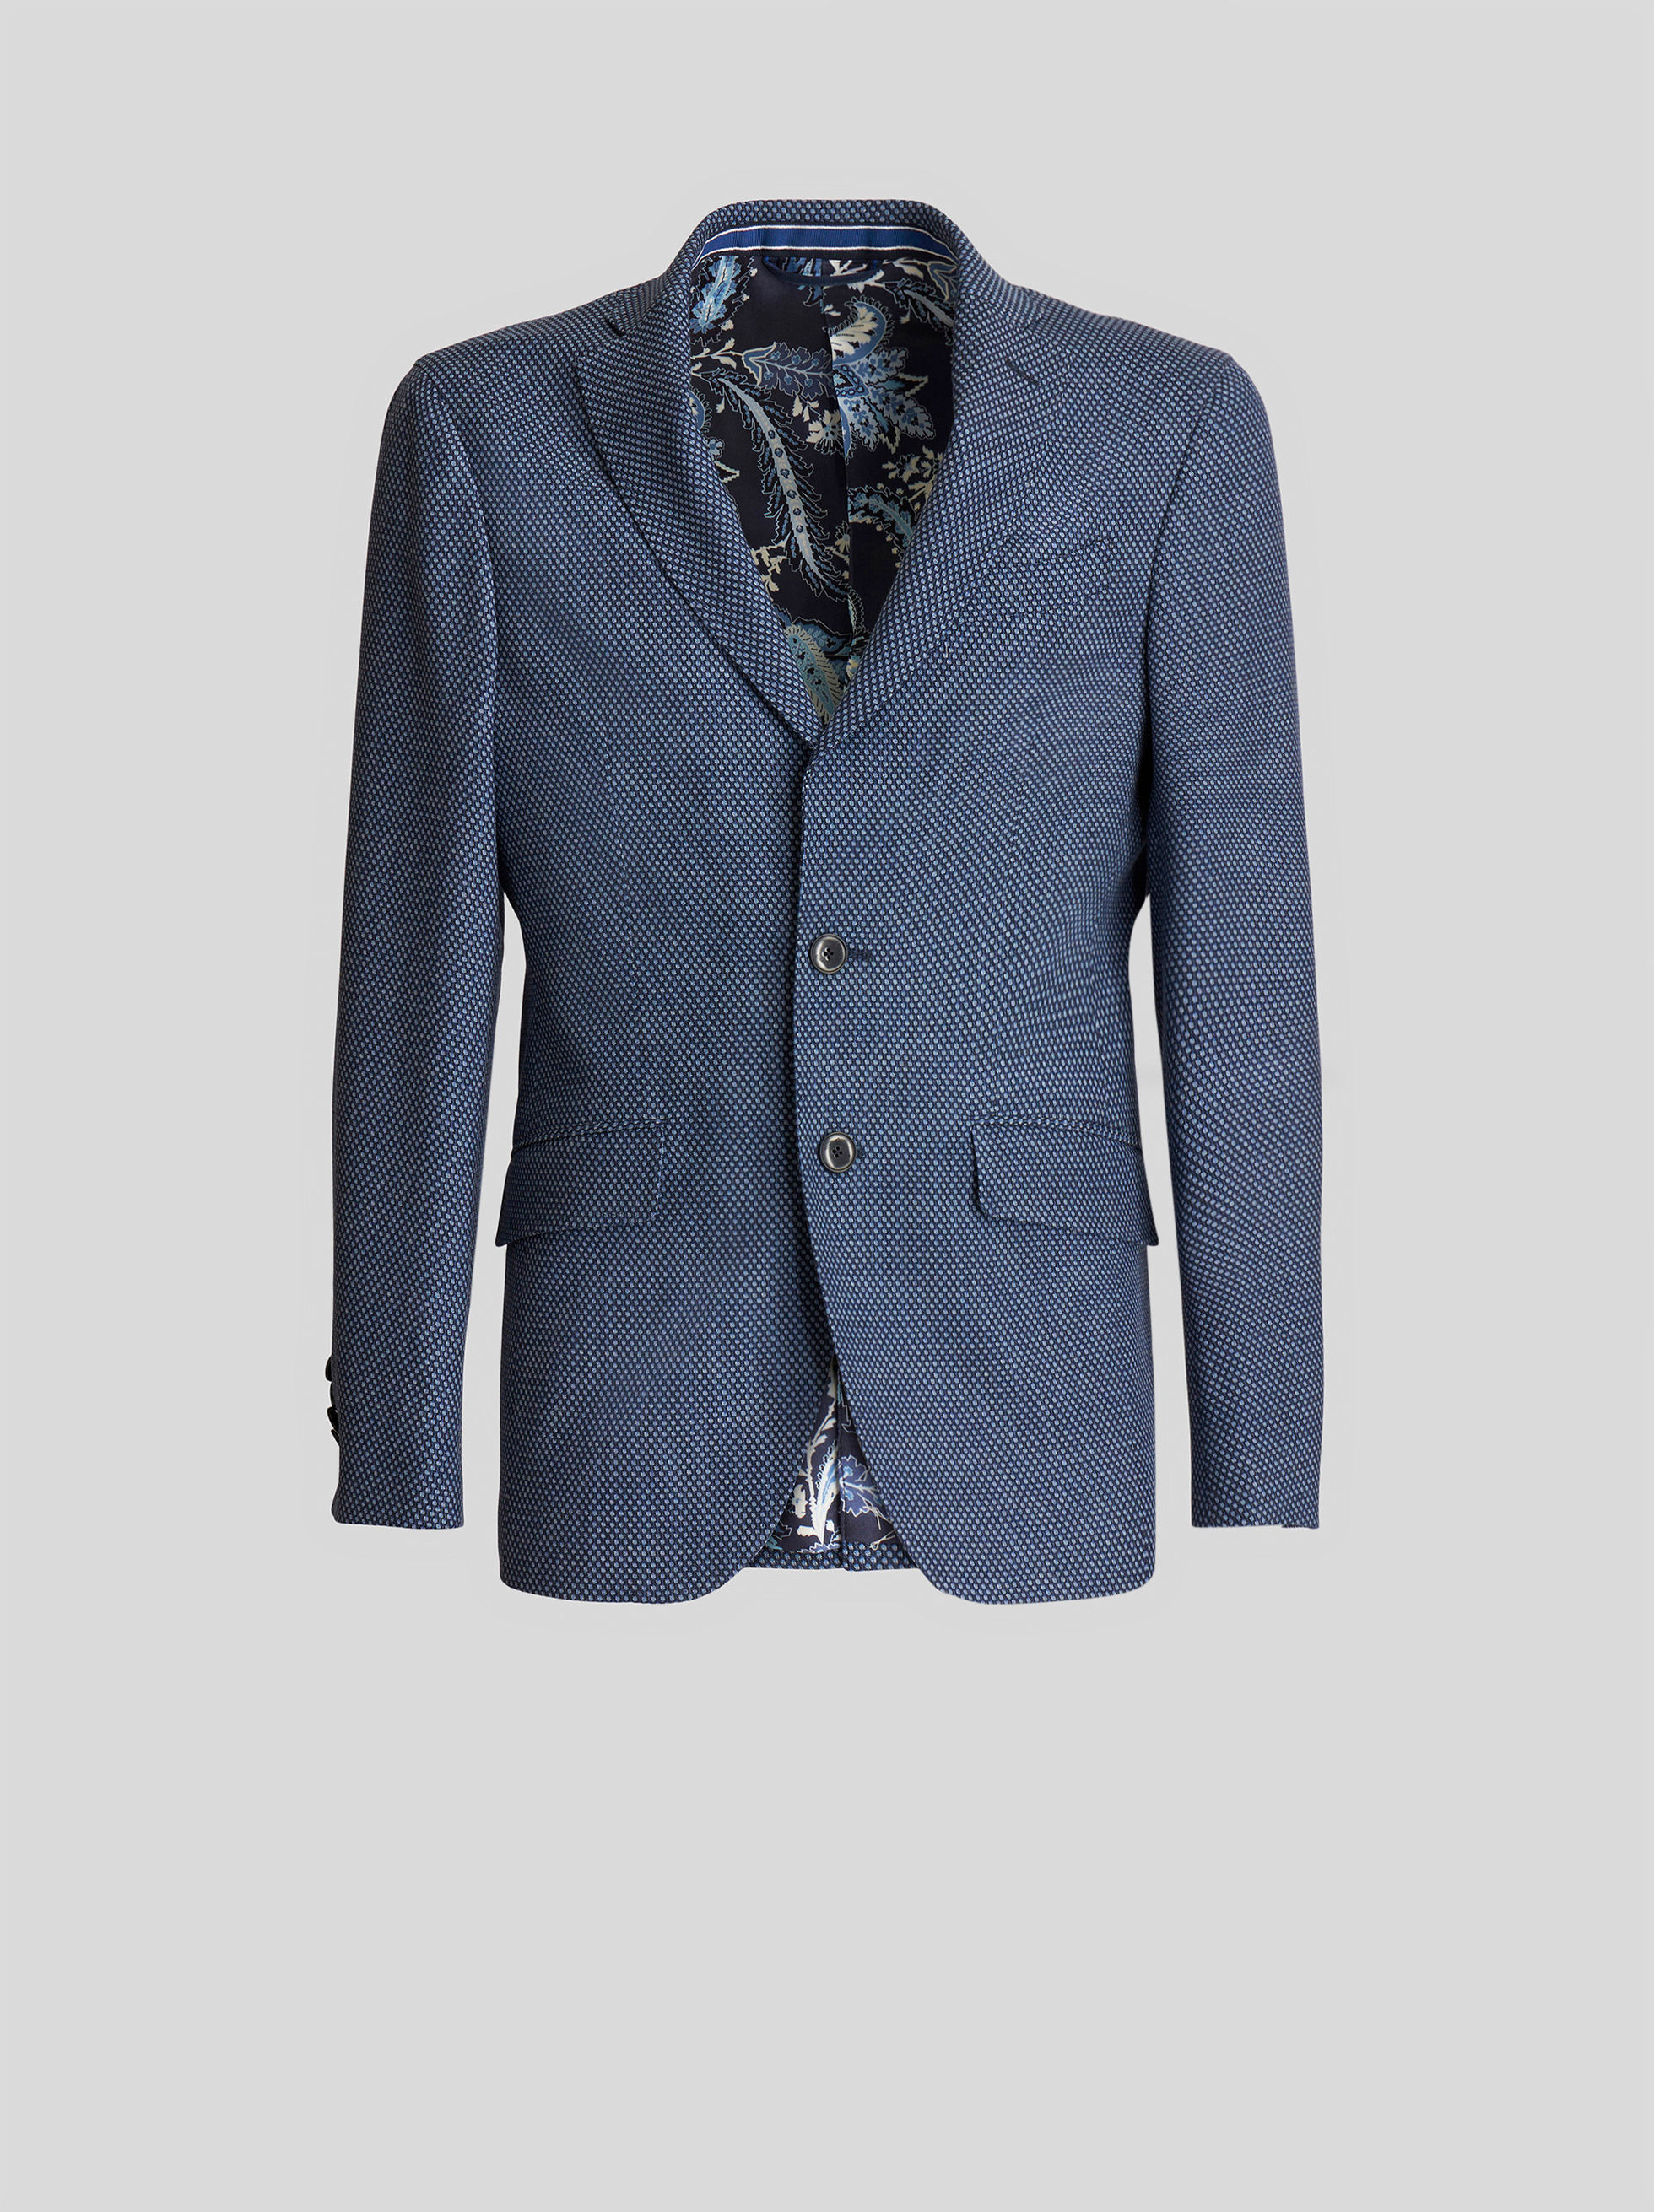 SUIT JACKET WITH MICRO GEOMETRIC PATTERN